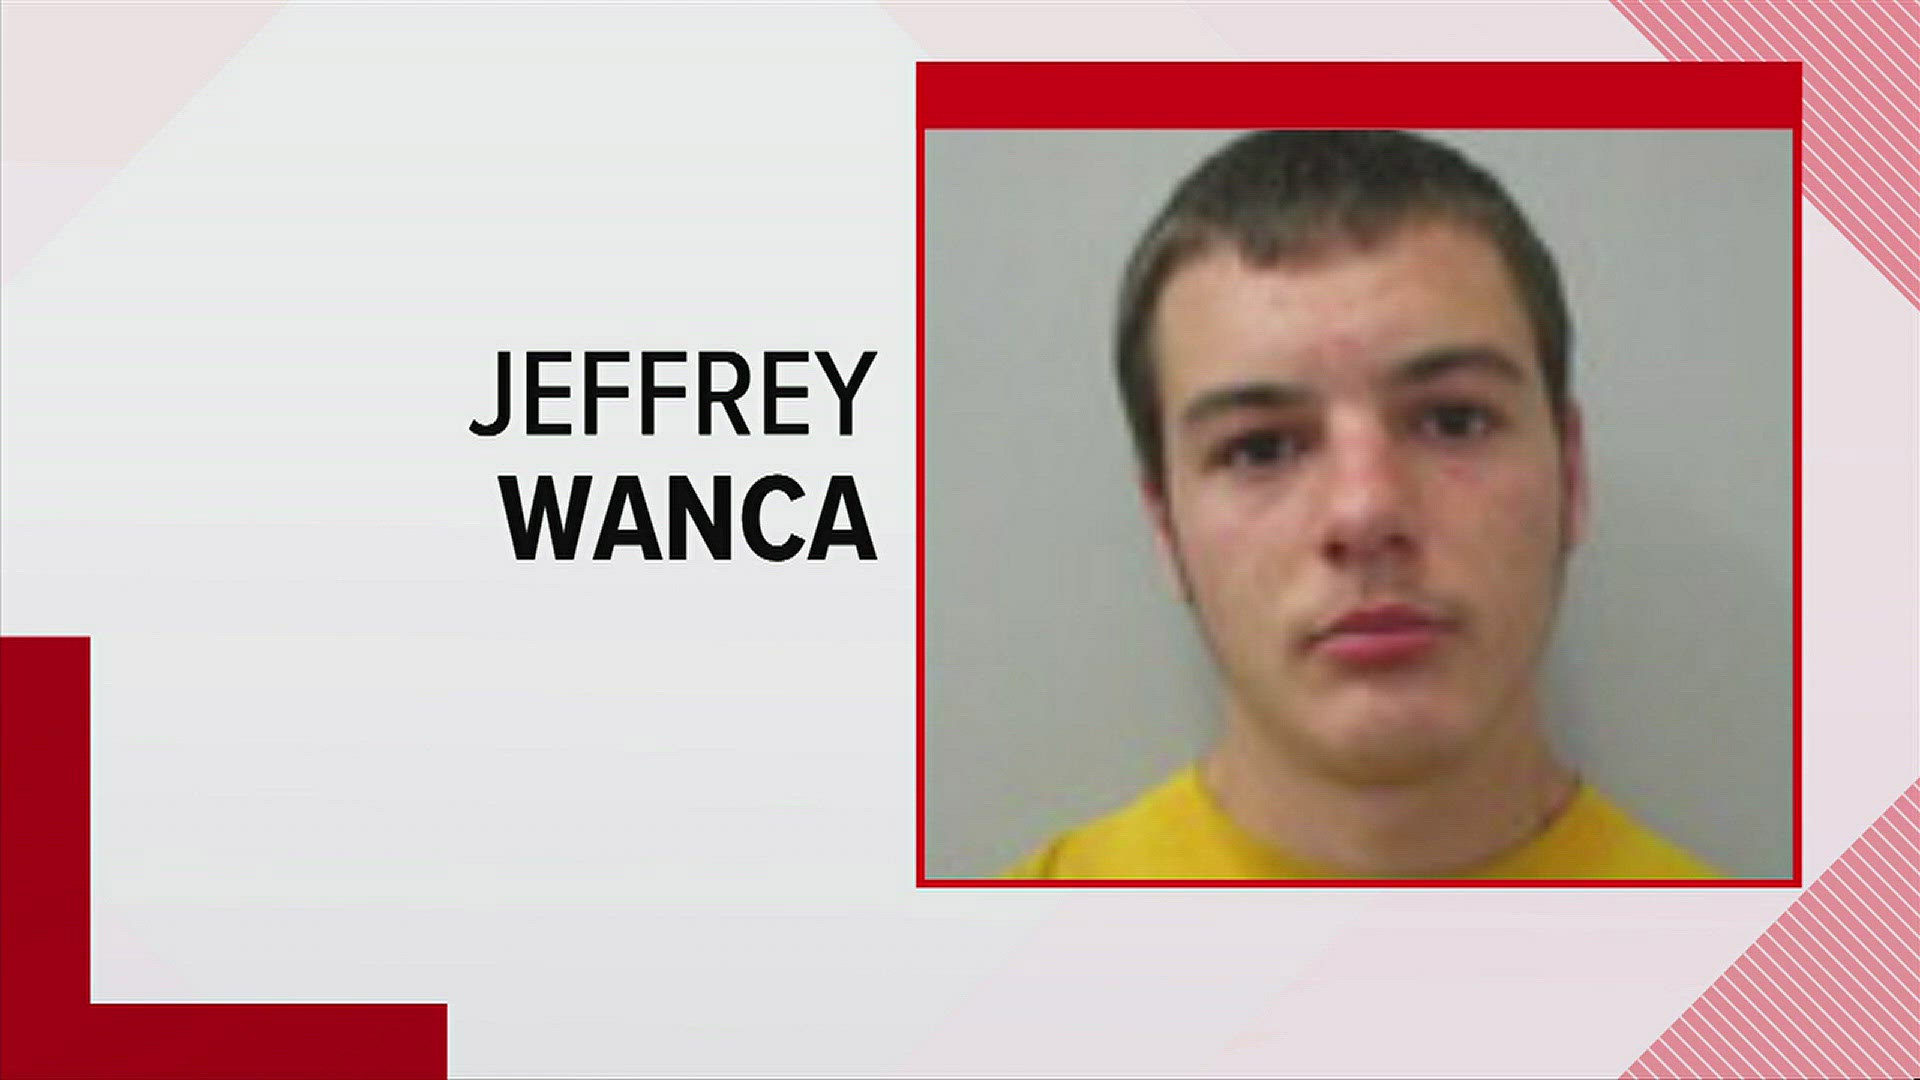 Jeffery Wanca was 16 when he was charged with the 2019 murder of his father.